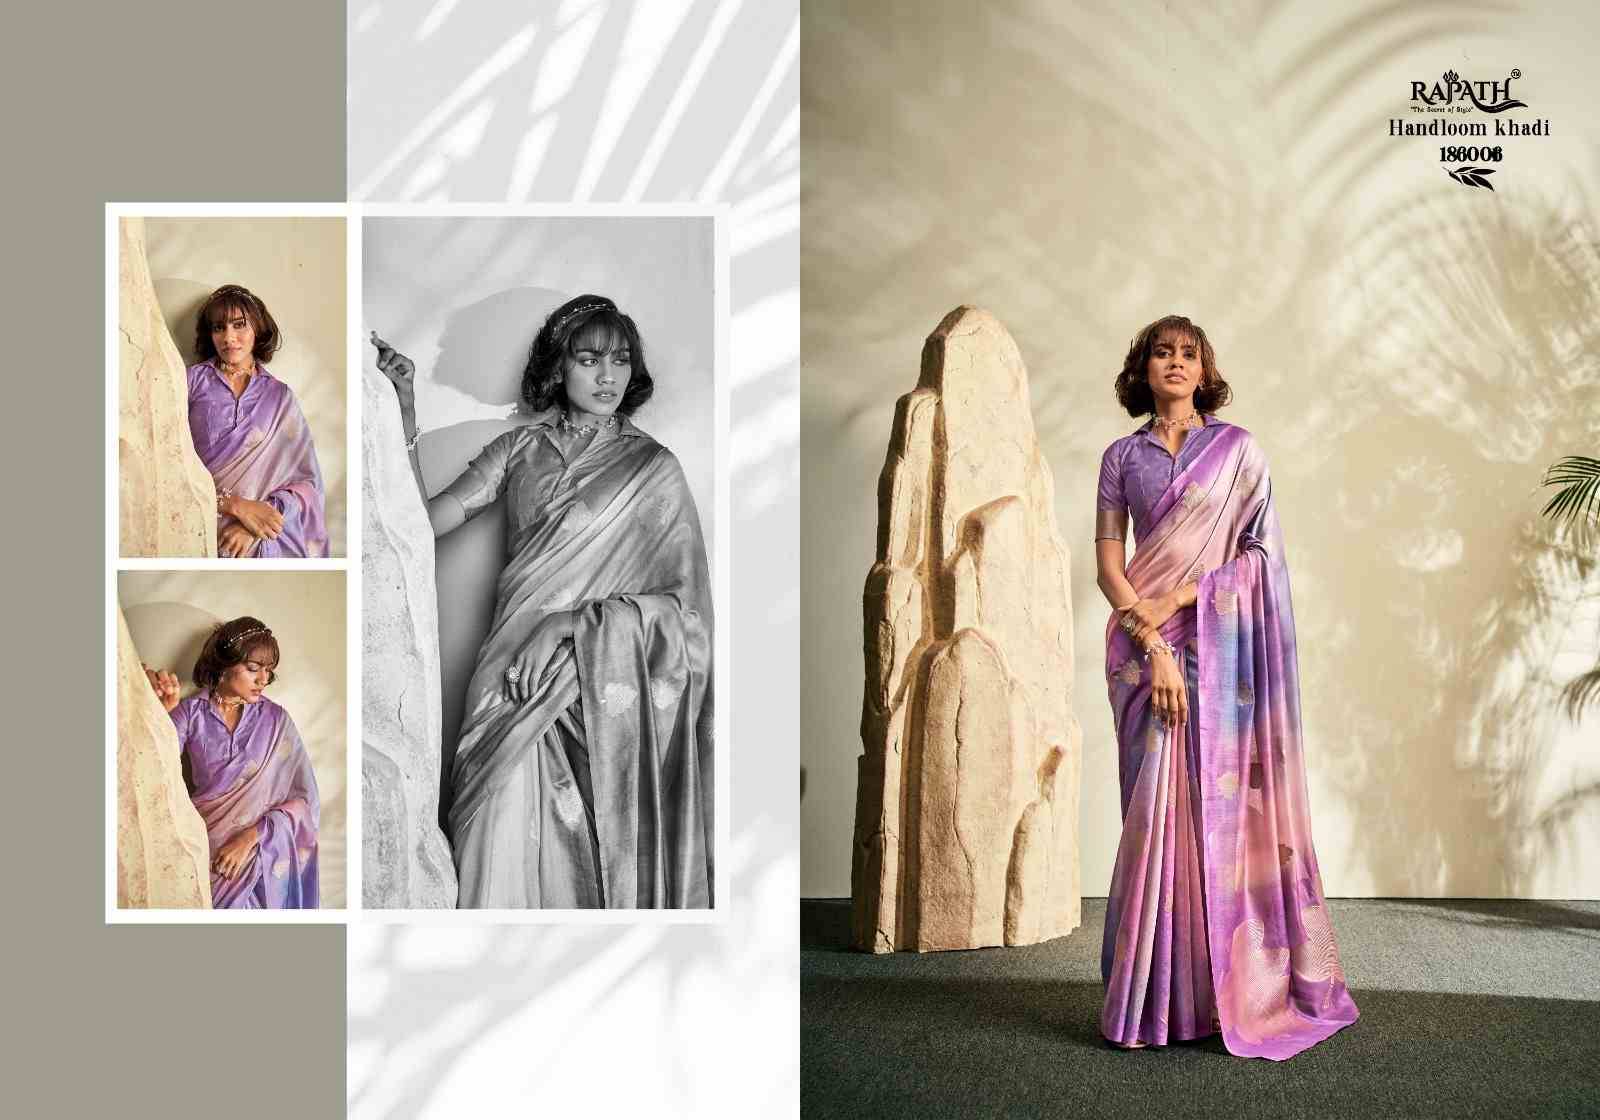 Asopalav Silk By Rajpath 186001 To 186006 Series Indian Traditional Wear Collection Beautiful Stylish Fancy Colorful Party Wear & Occasional Wear Handloom Khadi Sarees At Wholesale Price